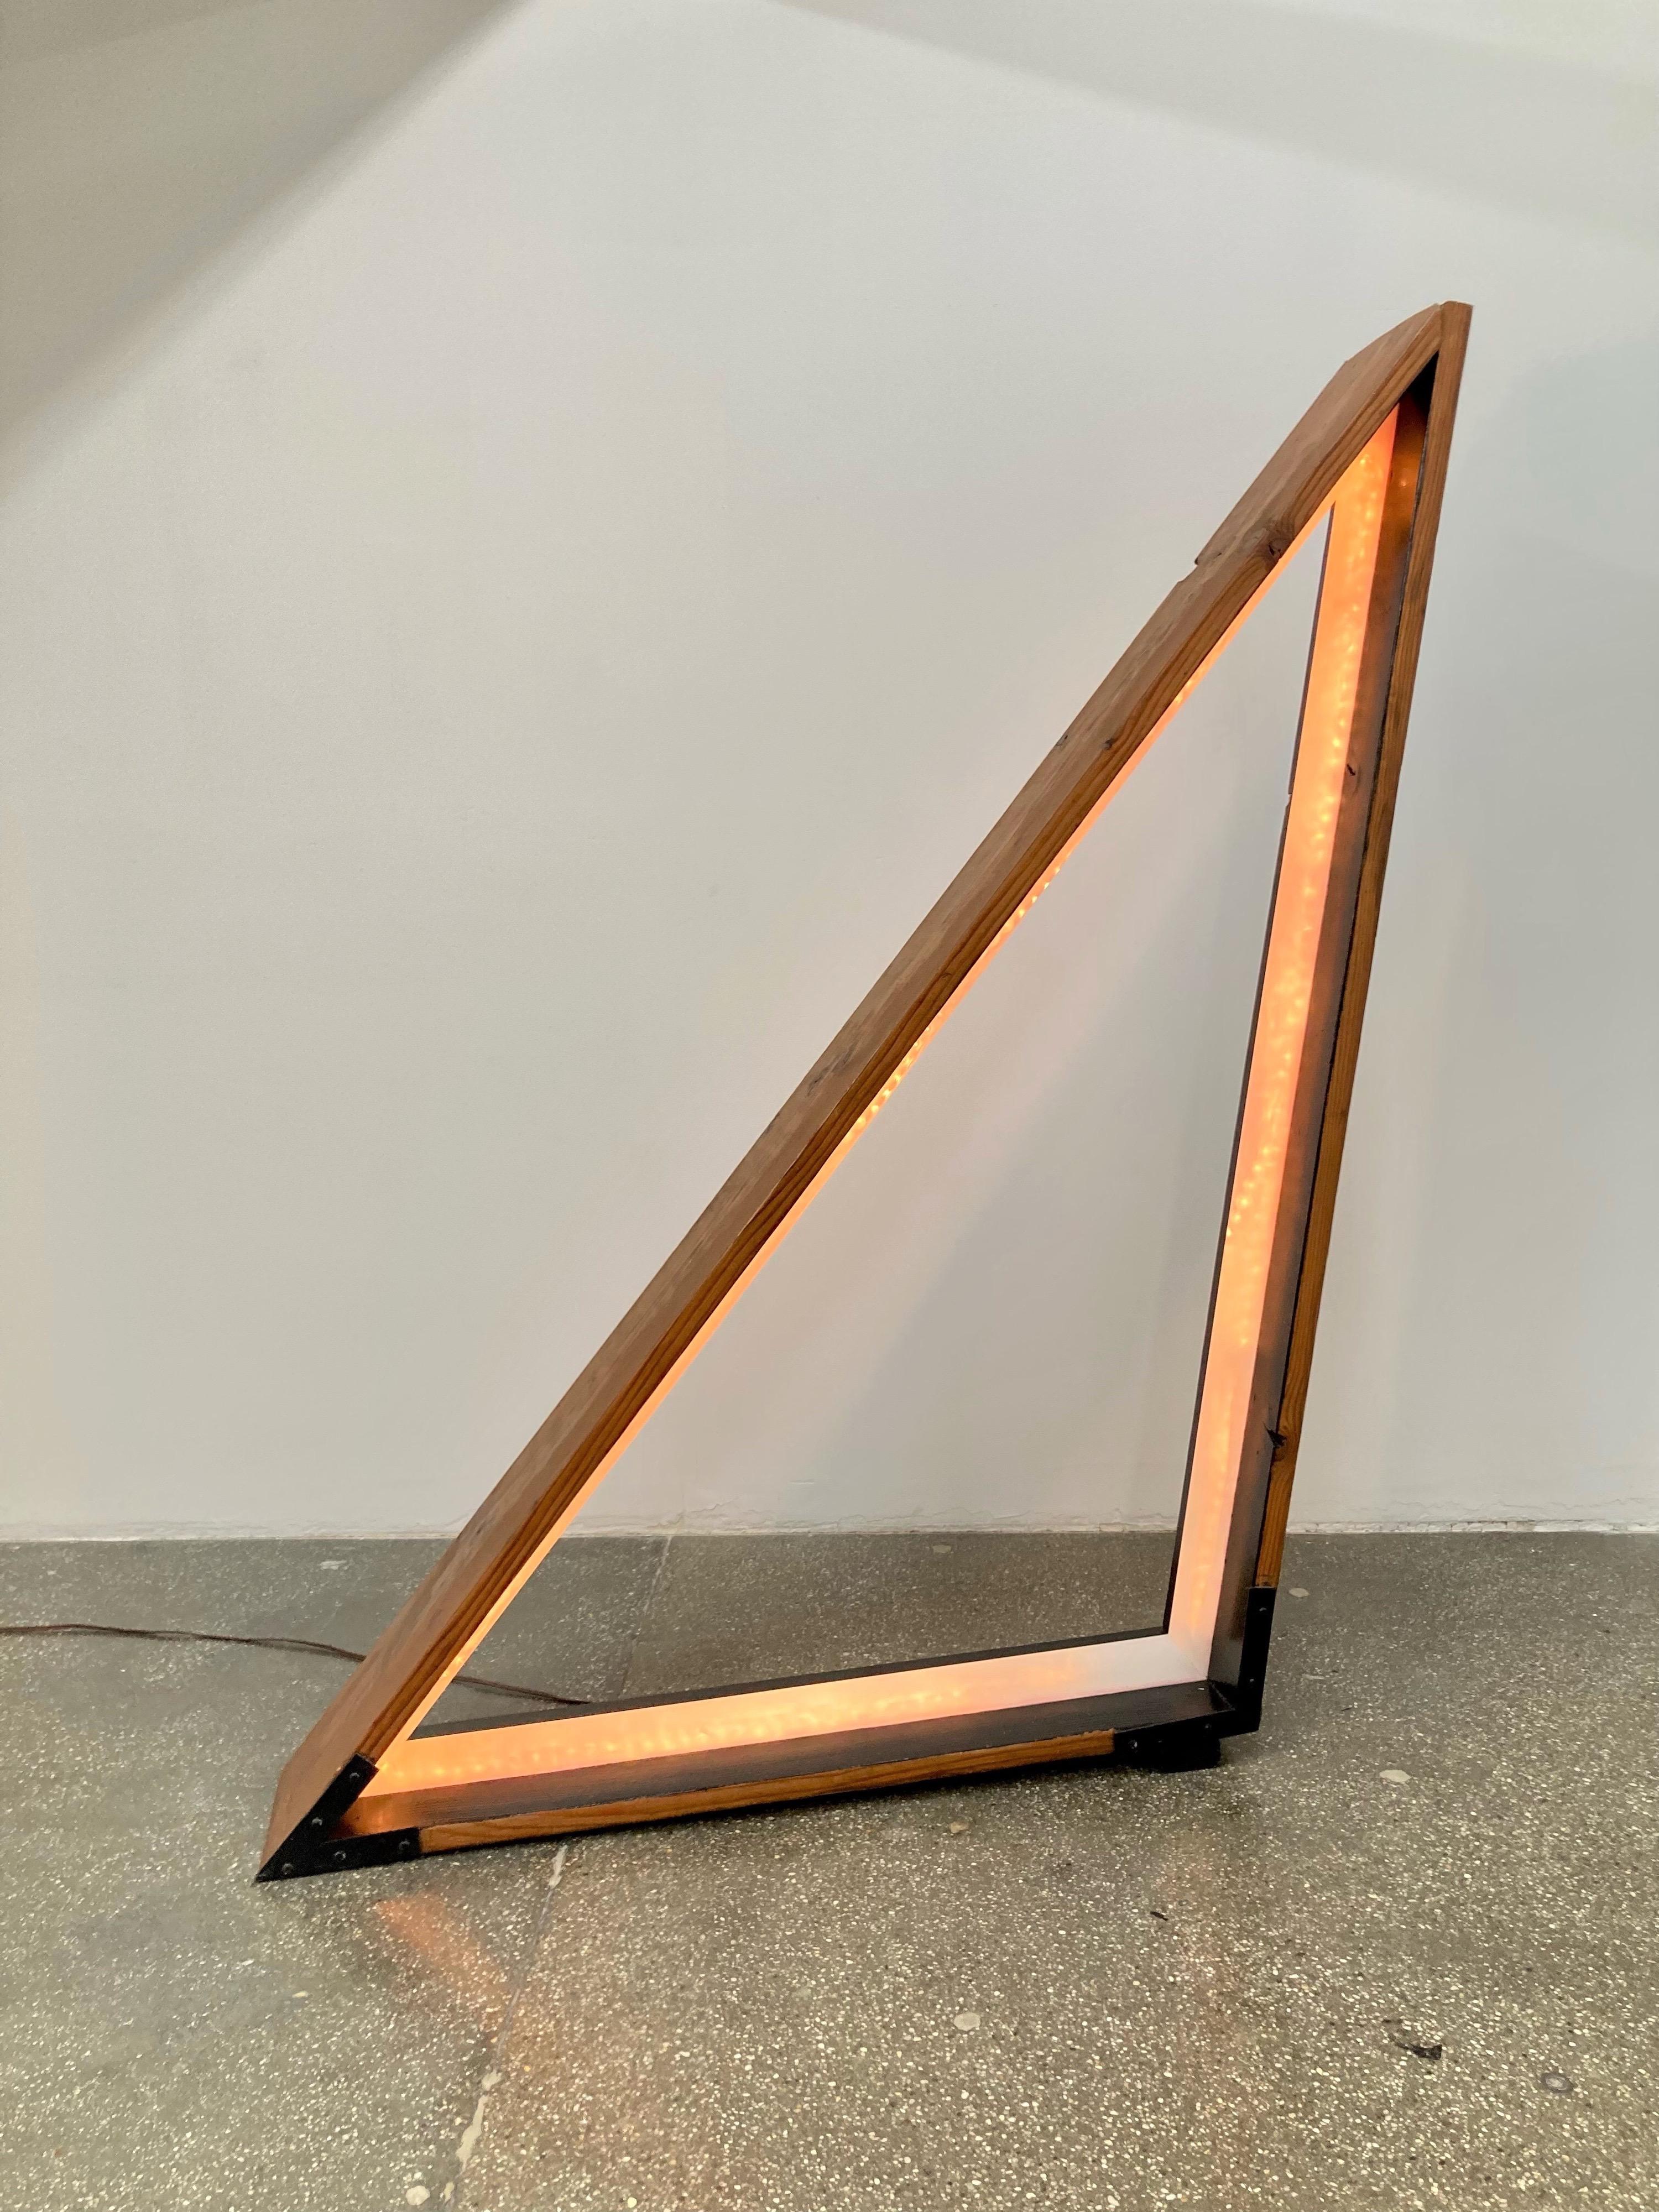 Large lighted geometric abstraction sculpture / floor lamp 'obscurite' by architect / artist / designer Raphael 